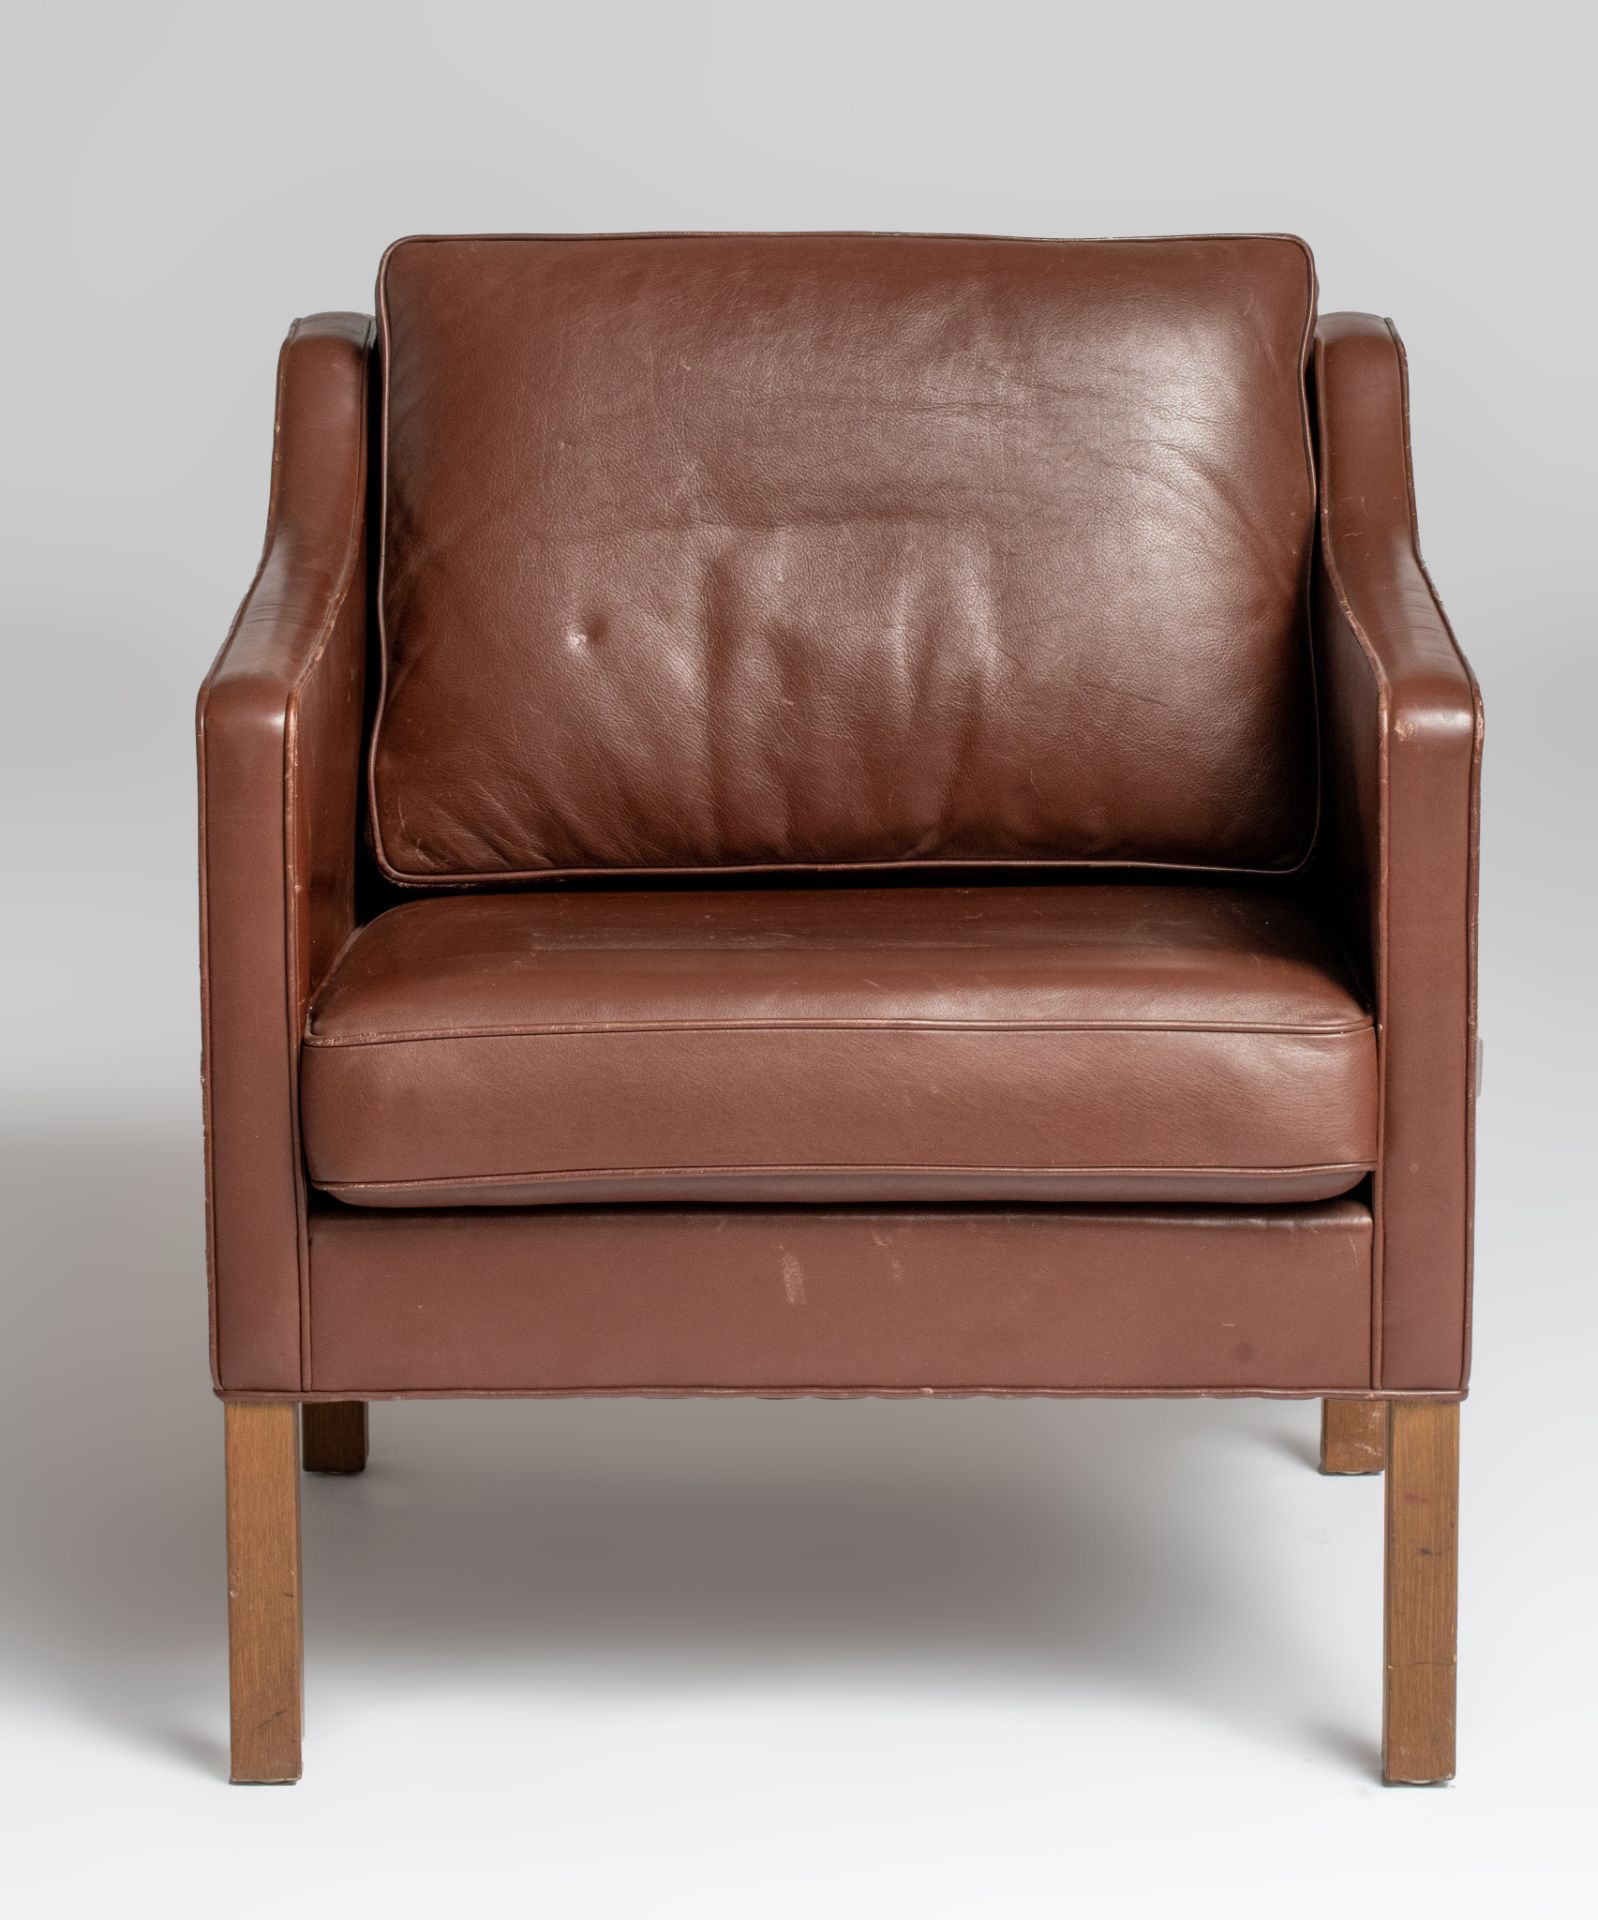 A brown leather armchair by Borge Mogensen for Ed Fredericia Stolefabrik, 1970, H 75 - W 71 cm - Image 4 of 13